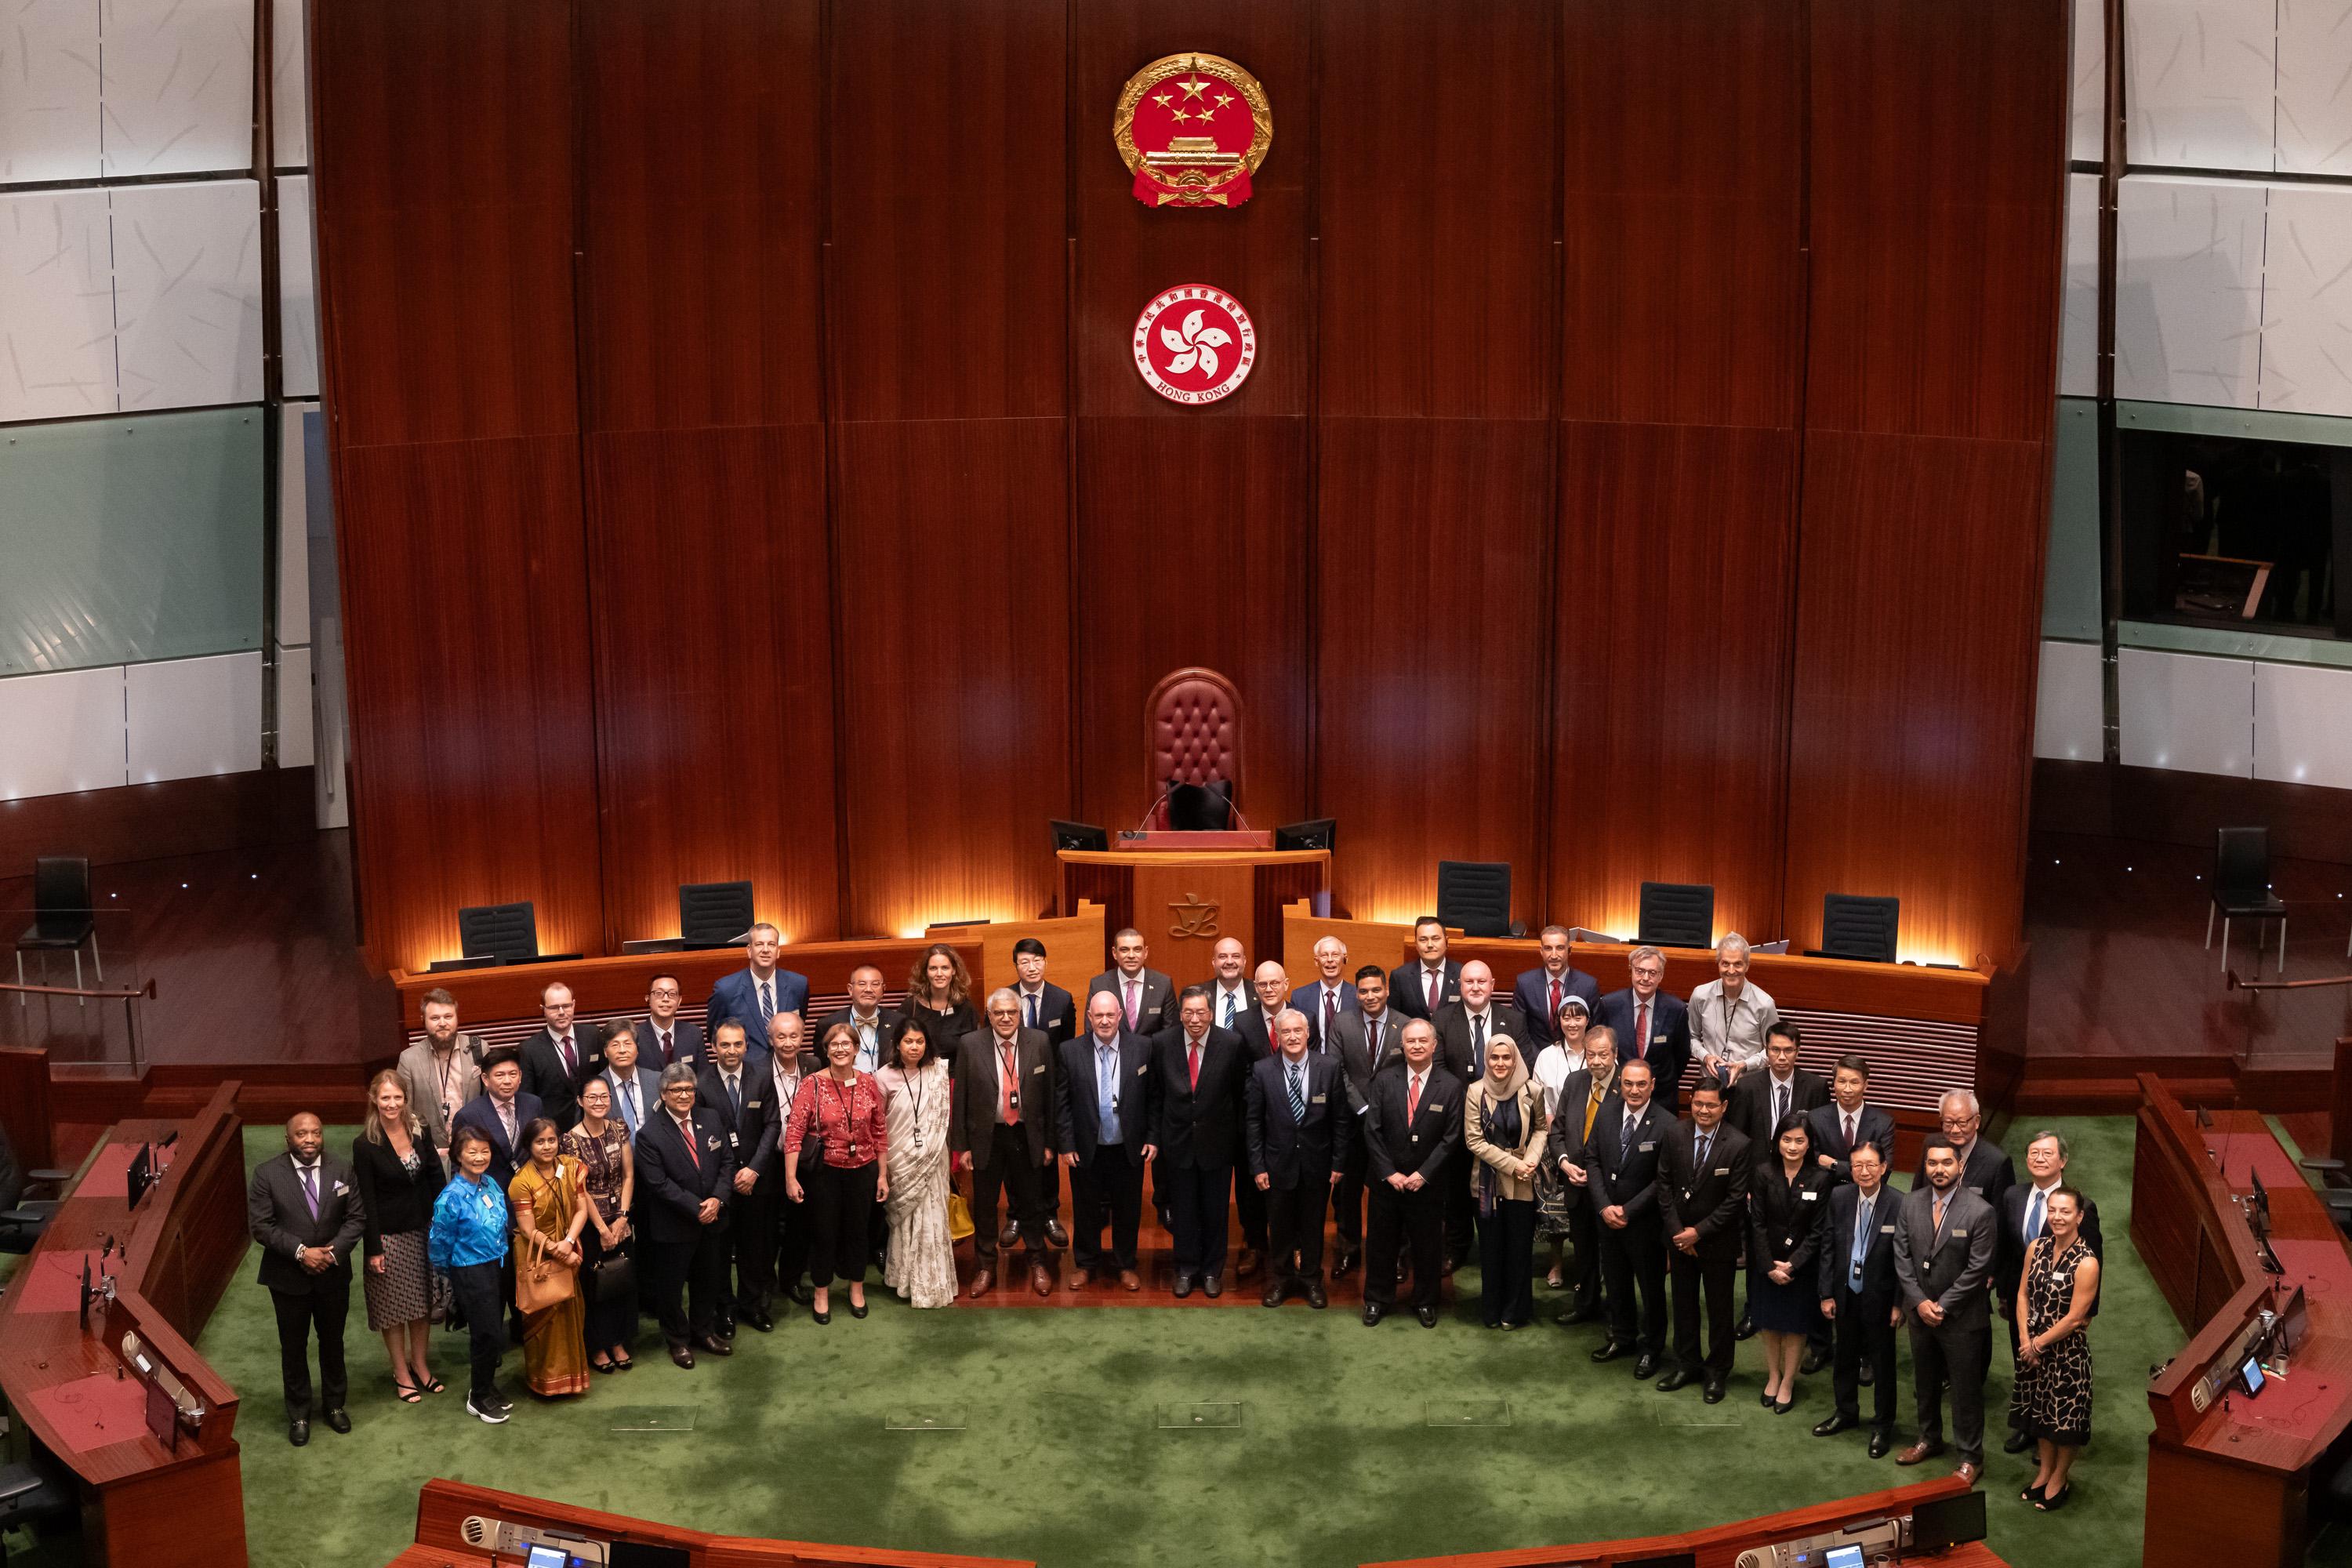 A cocktail reception between the Legislative Council (LegCo) Members and the Consuls-General (CGs) as well as Honorary Consuls (HCs) in Hong Kong was held today (July 11) in the LegCo Complex. The President of LegCo, Mr Andrew Leung (front row, centre), poses for a group photo with the CGs or their representatives as well as HCs in Hong Kong in the Chamber of the LegCo Complex.